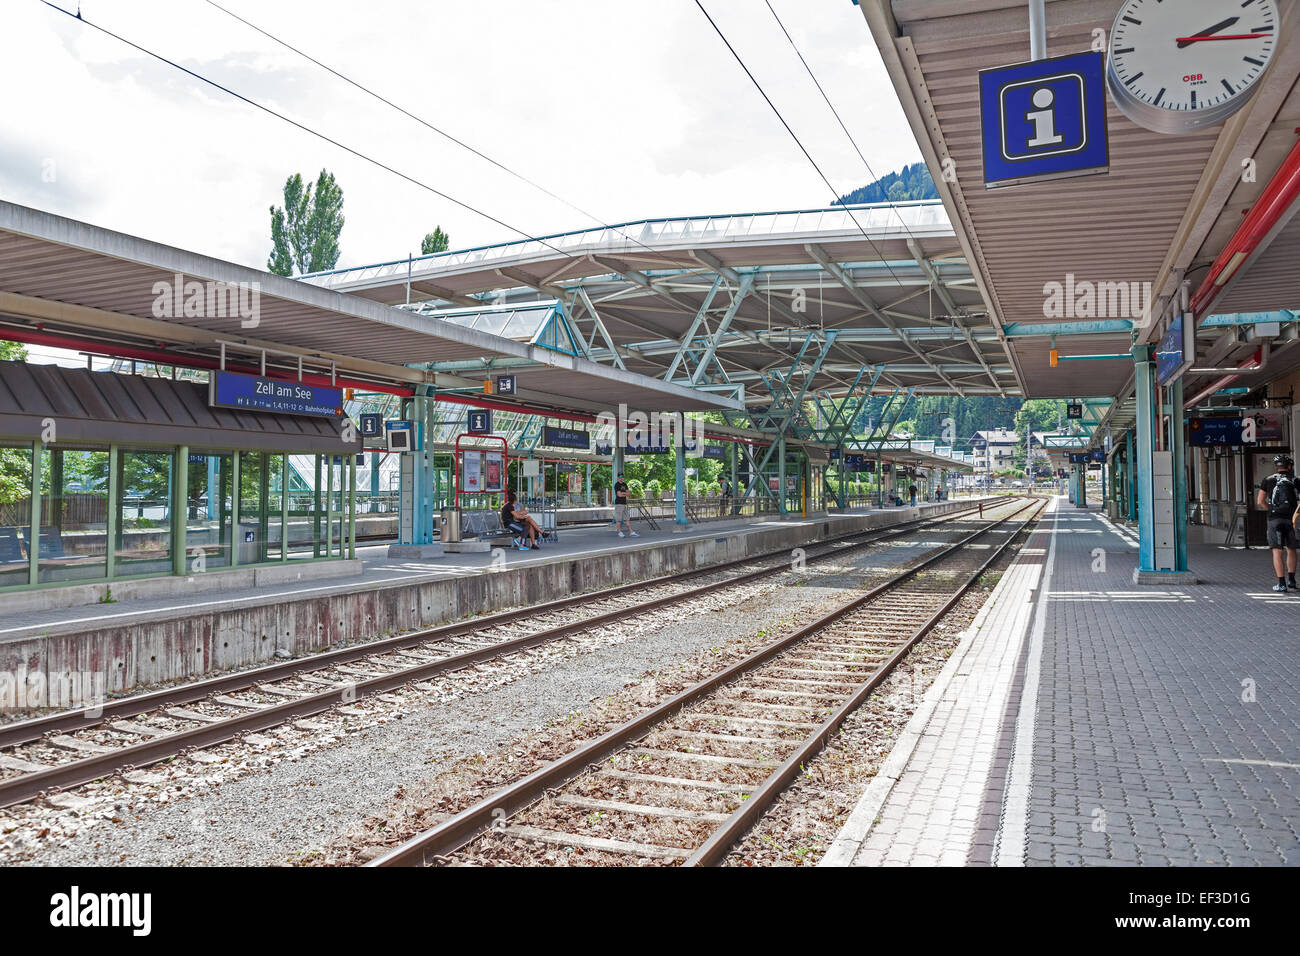 The train station at Zell am See Austria Stock Photo